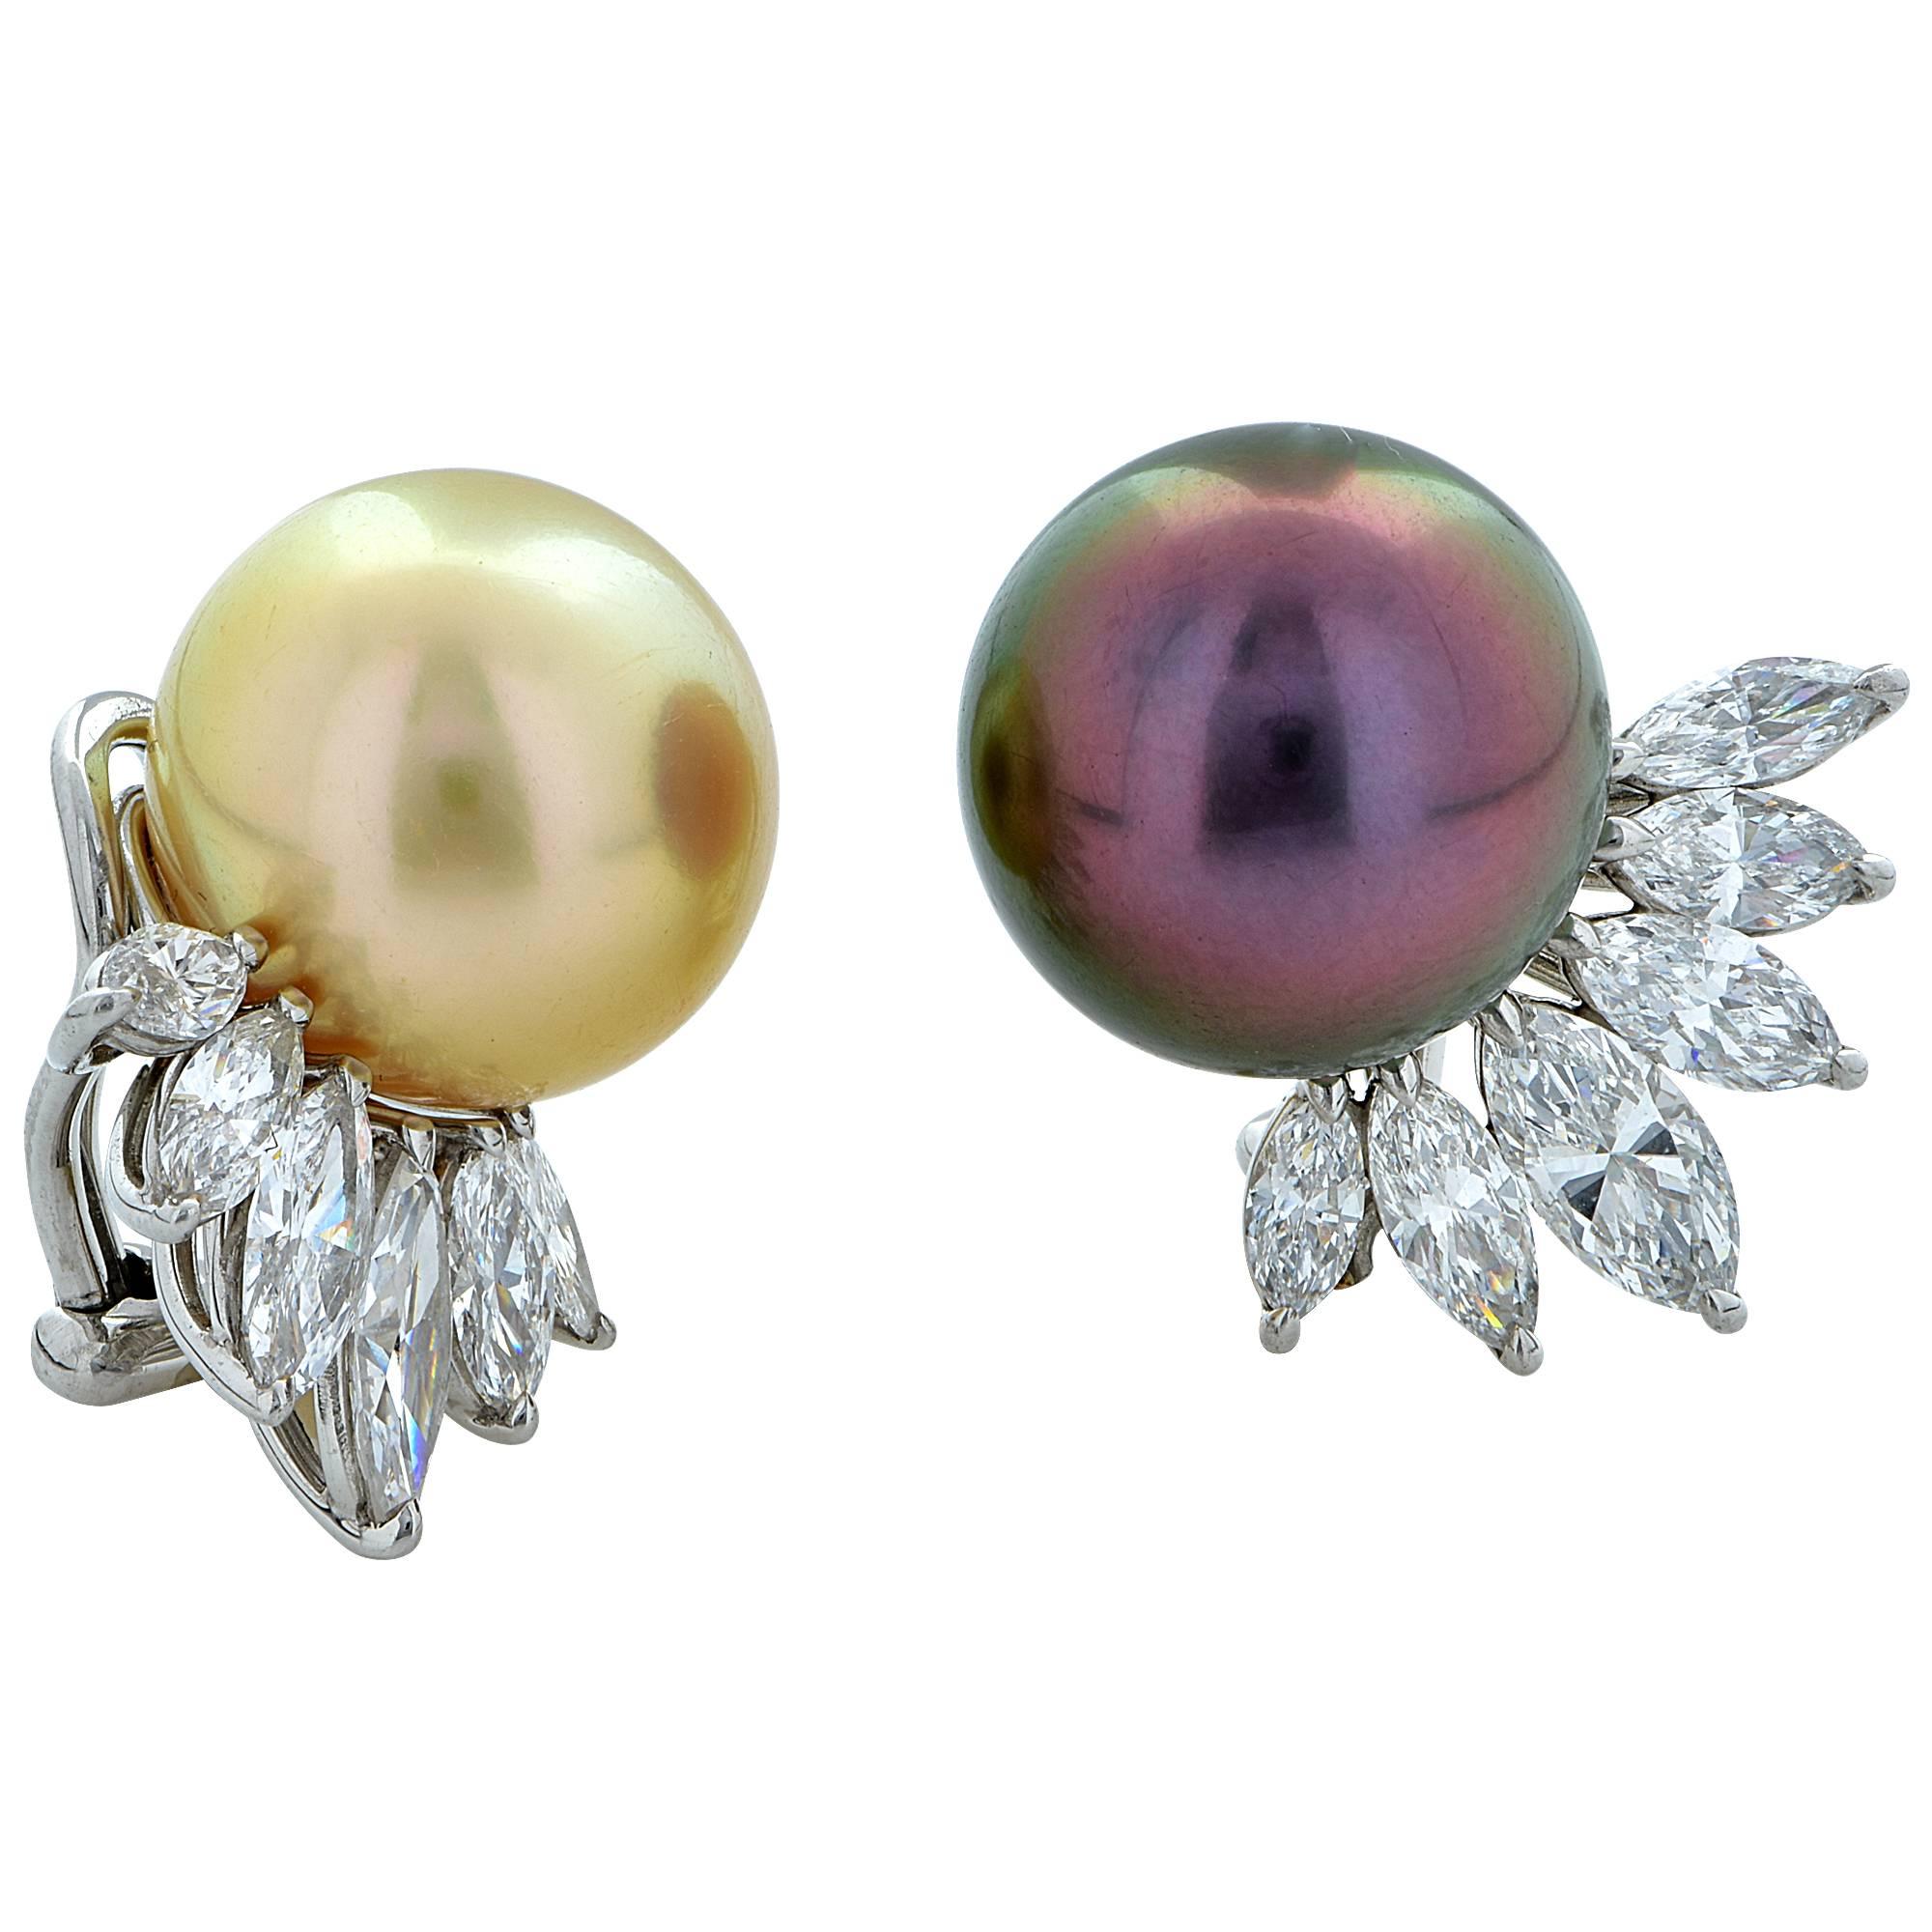 Stunning platinum handmade diamond and pearl earrings featuring a Tahitian pearl and a yellow pearl measuring 14.6mm. Dangling from the pearls are 12 marquise cut diamonds weighing approximately 4.50cts total, G color, VS1-2 clarity. These